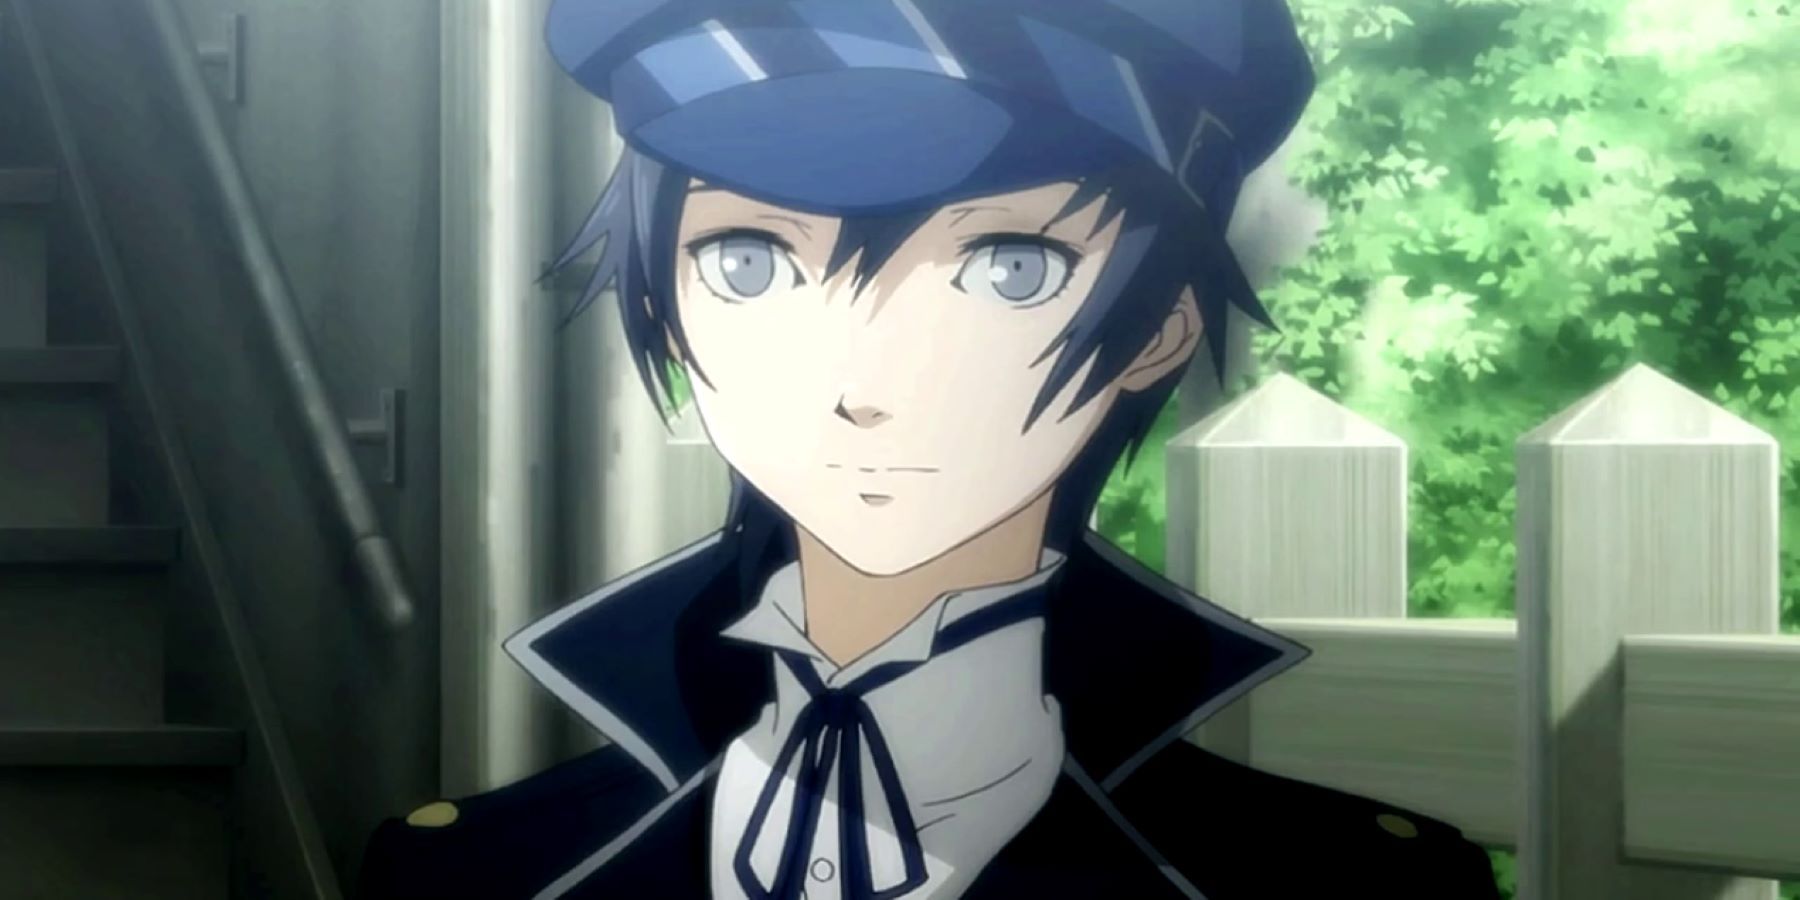 Naoto Shirogane in an animated cutscene from Persona 4 Golden